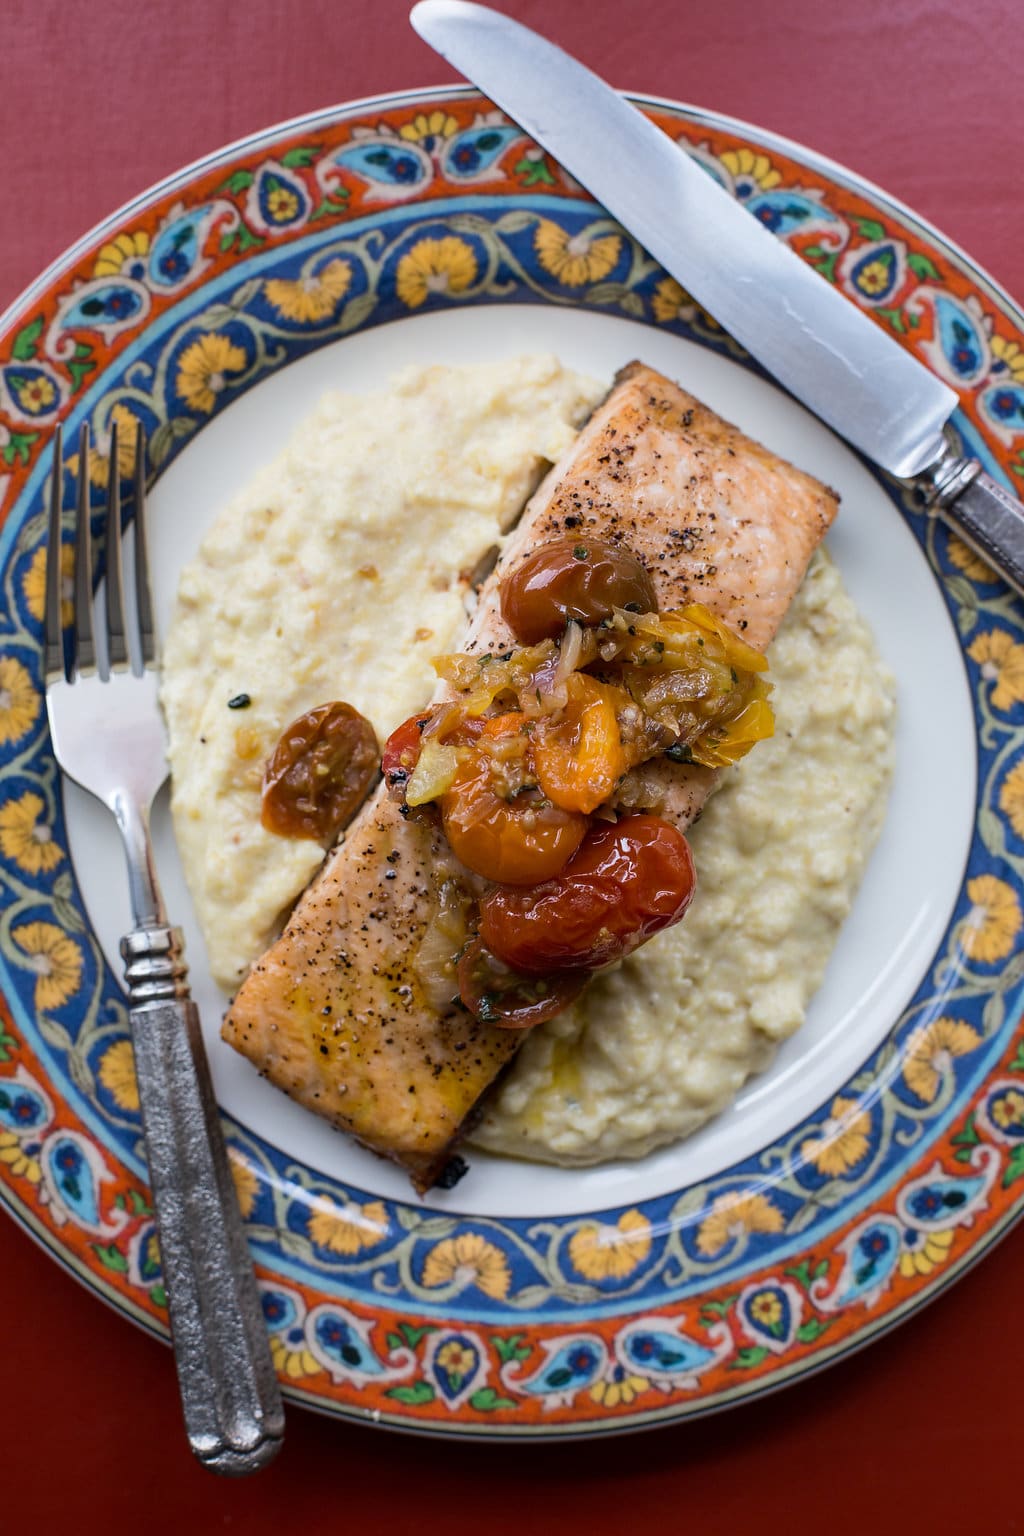 Salmon with Polenta and Warm Tomato Vinaigrette on a colorful plate.